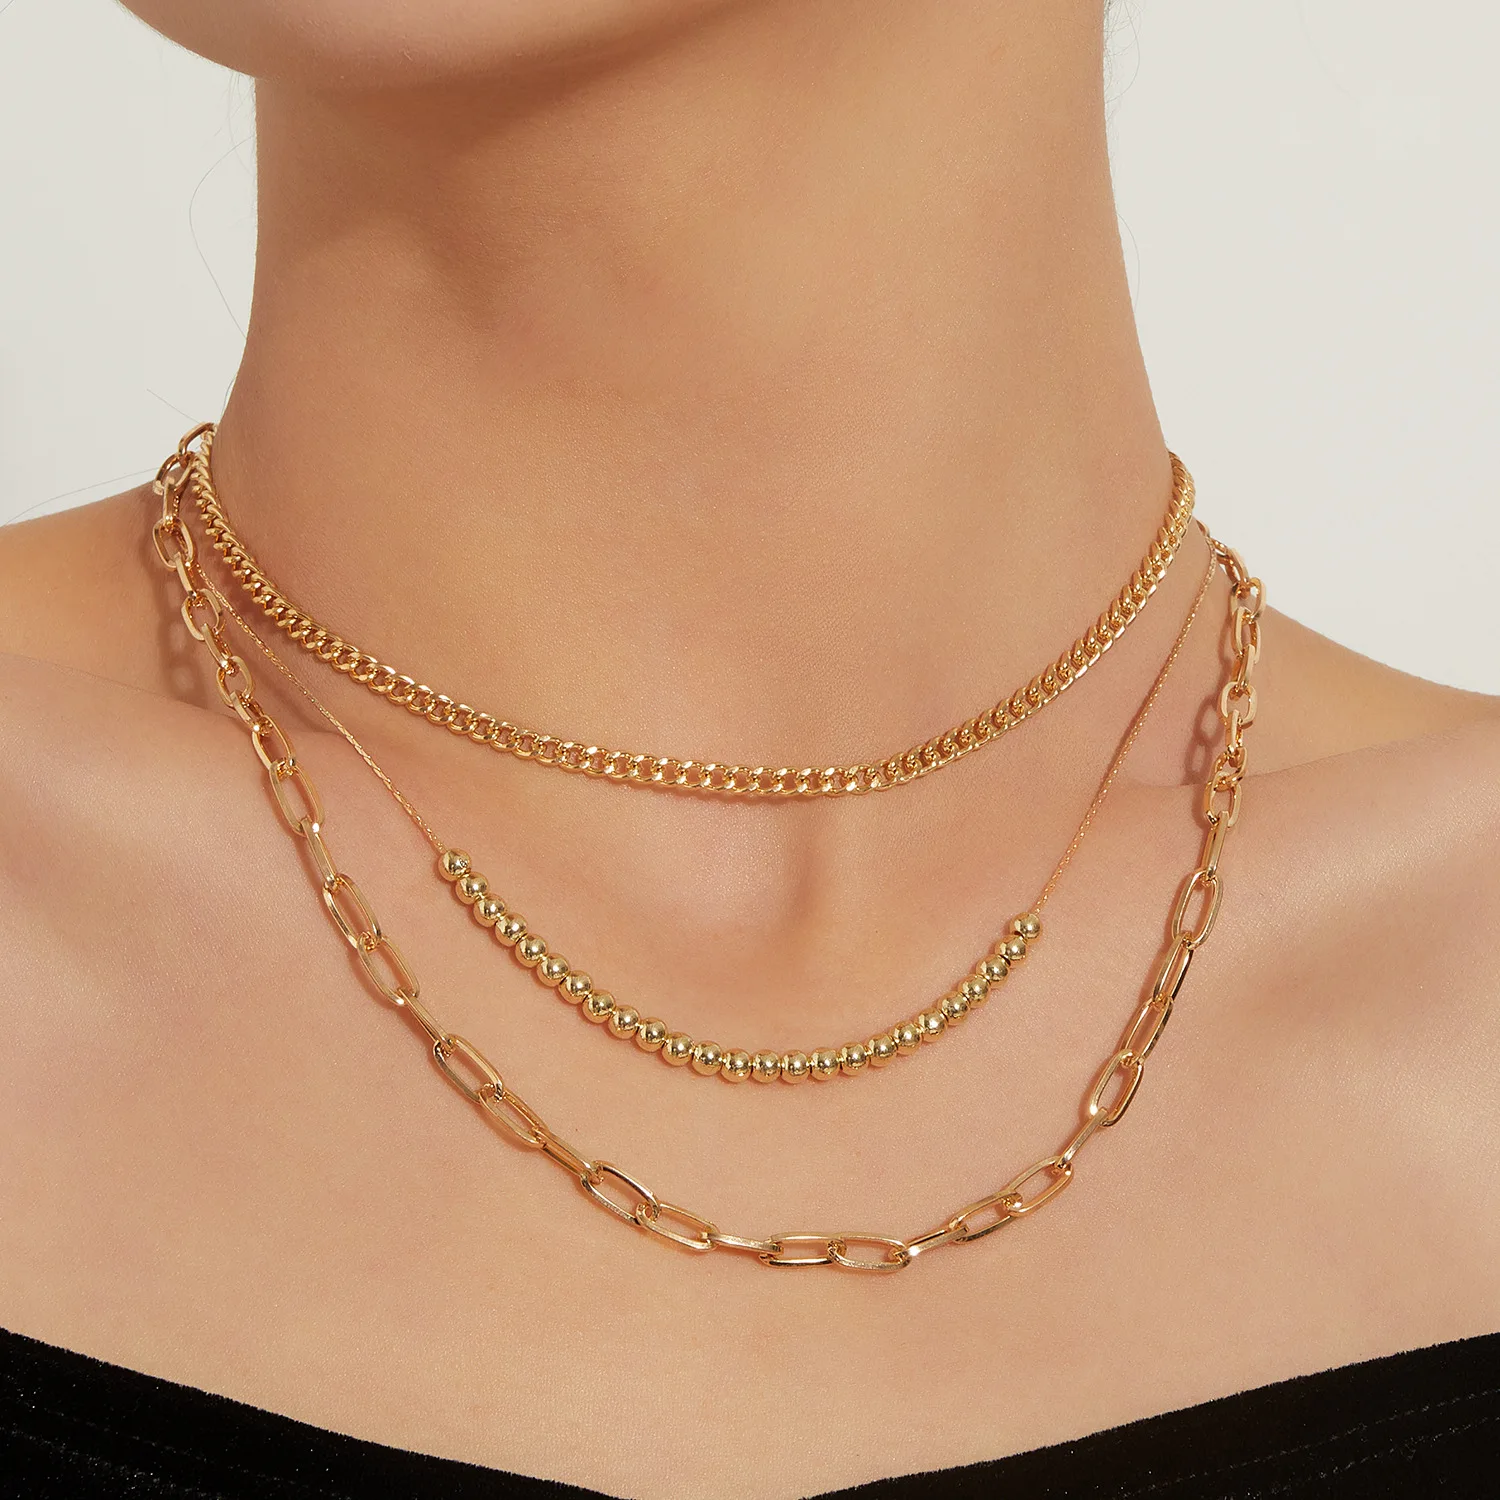 

Bohemian Dainty Layered Choker Necklaces Multilayer Adjustable Layering Chain Gold Slub metal chain Necklaces Set for Women Girl